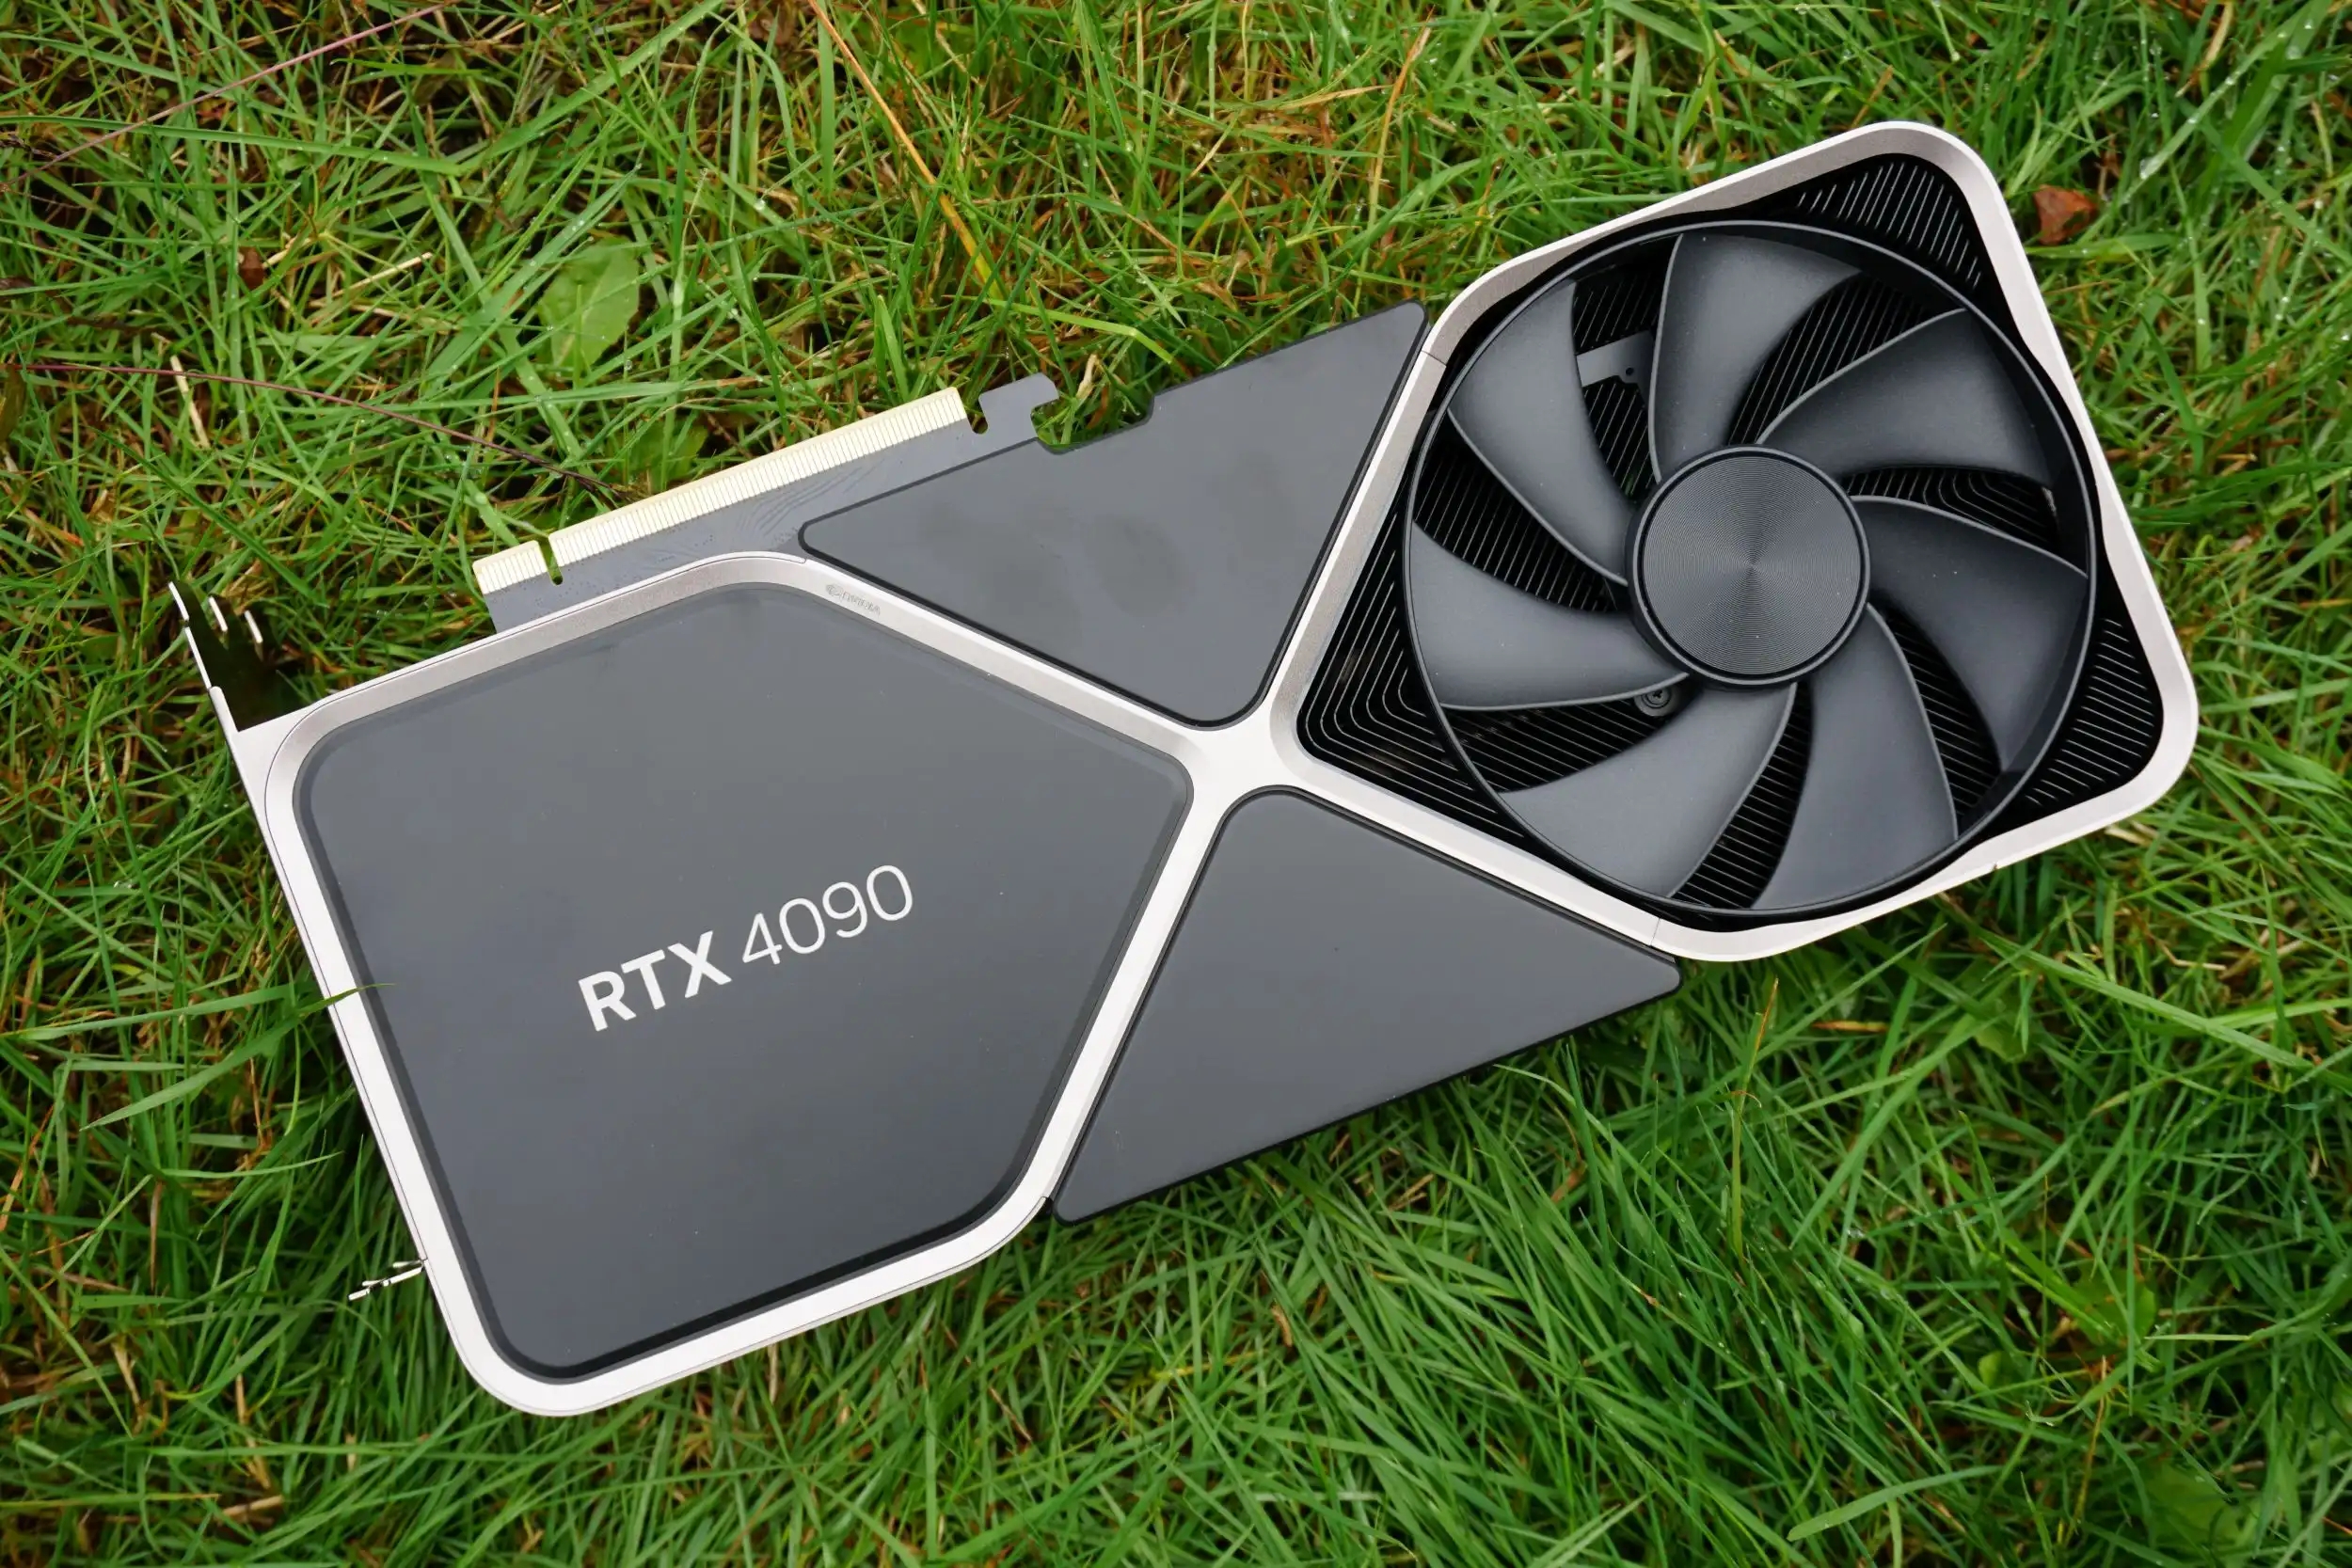 The Unforeseen Consequence: How the US Chip Ban Led to Skyrocketing Prices of RTX 4090 Graphics Cards in China